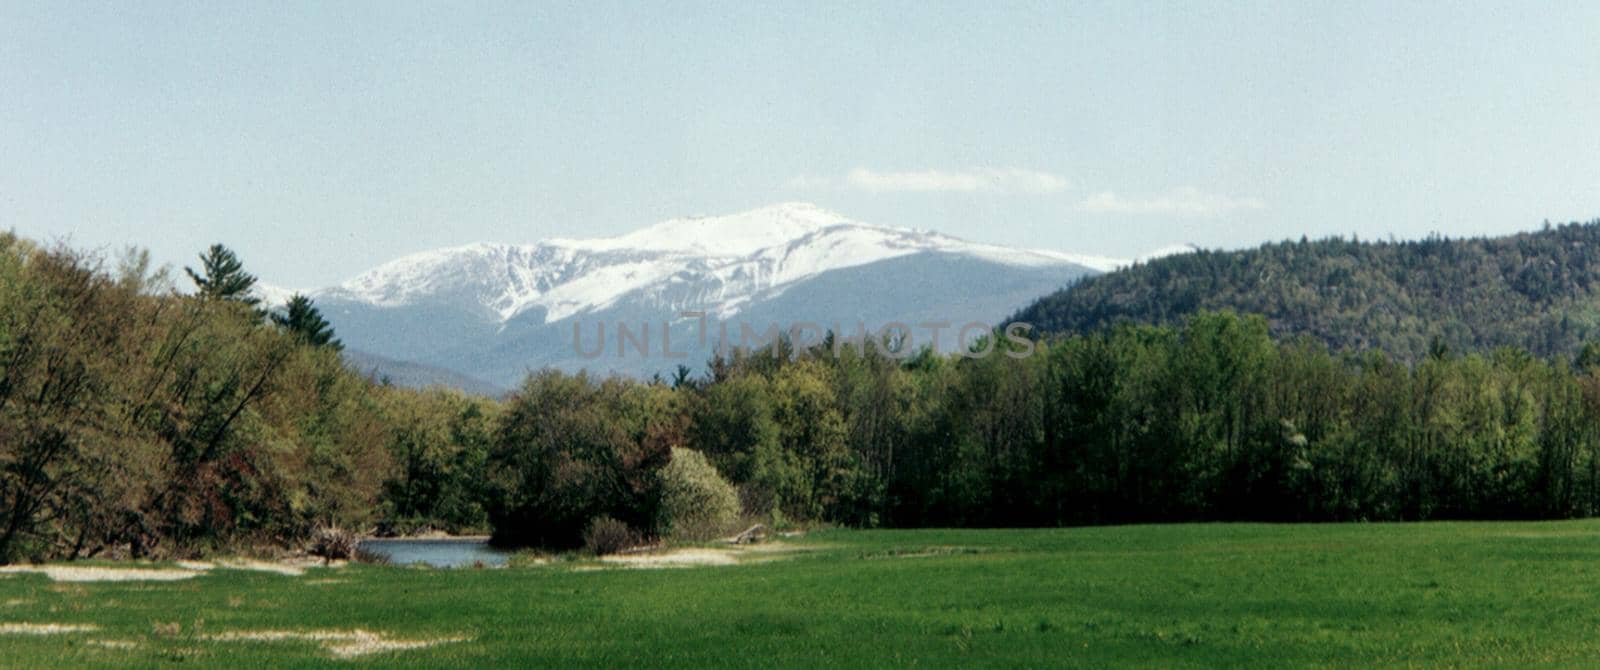 Snow-capped mountain panoramic landscape with forests and a small tranquil lake in the foreground, beauty in nature